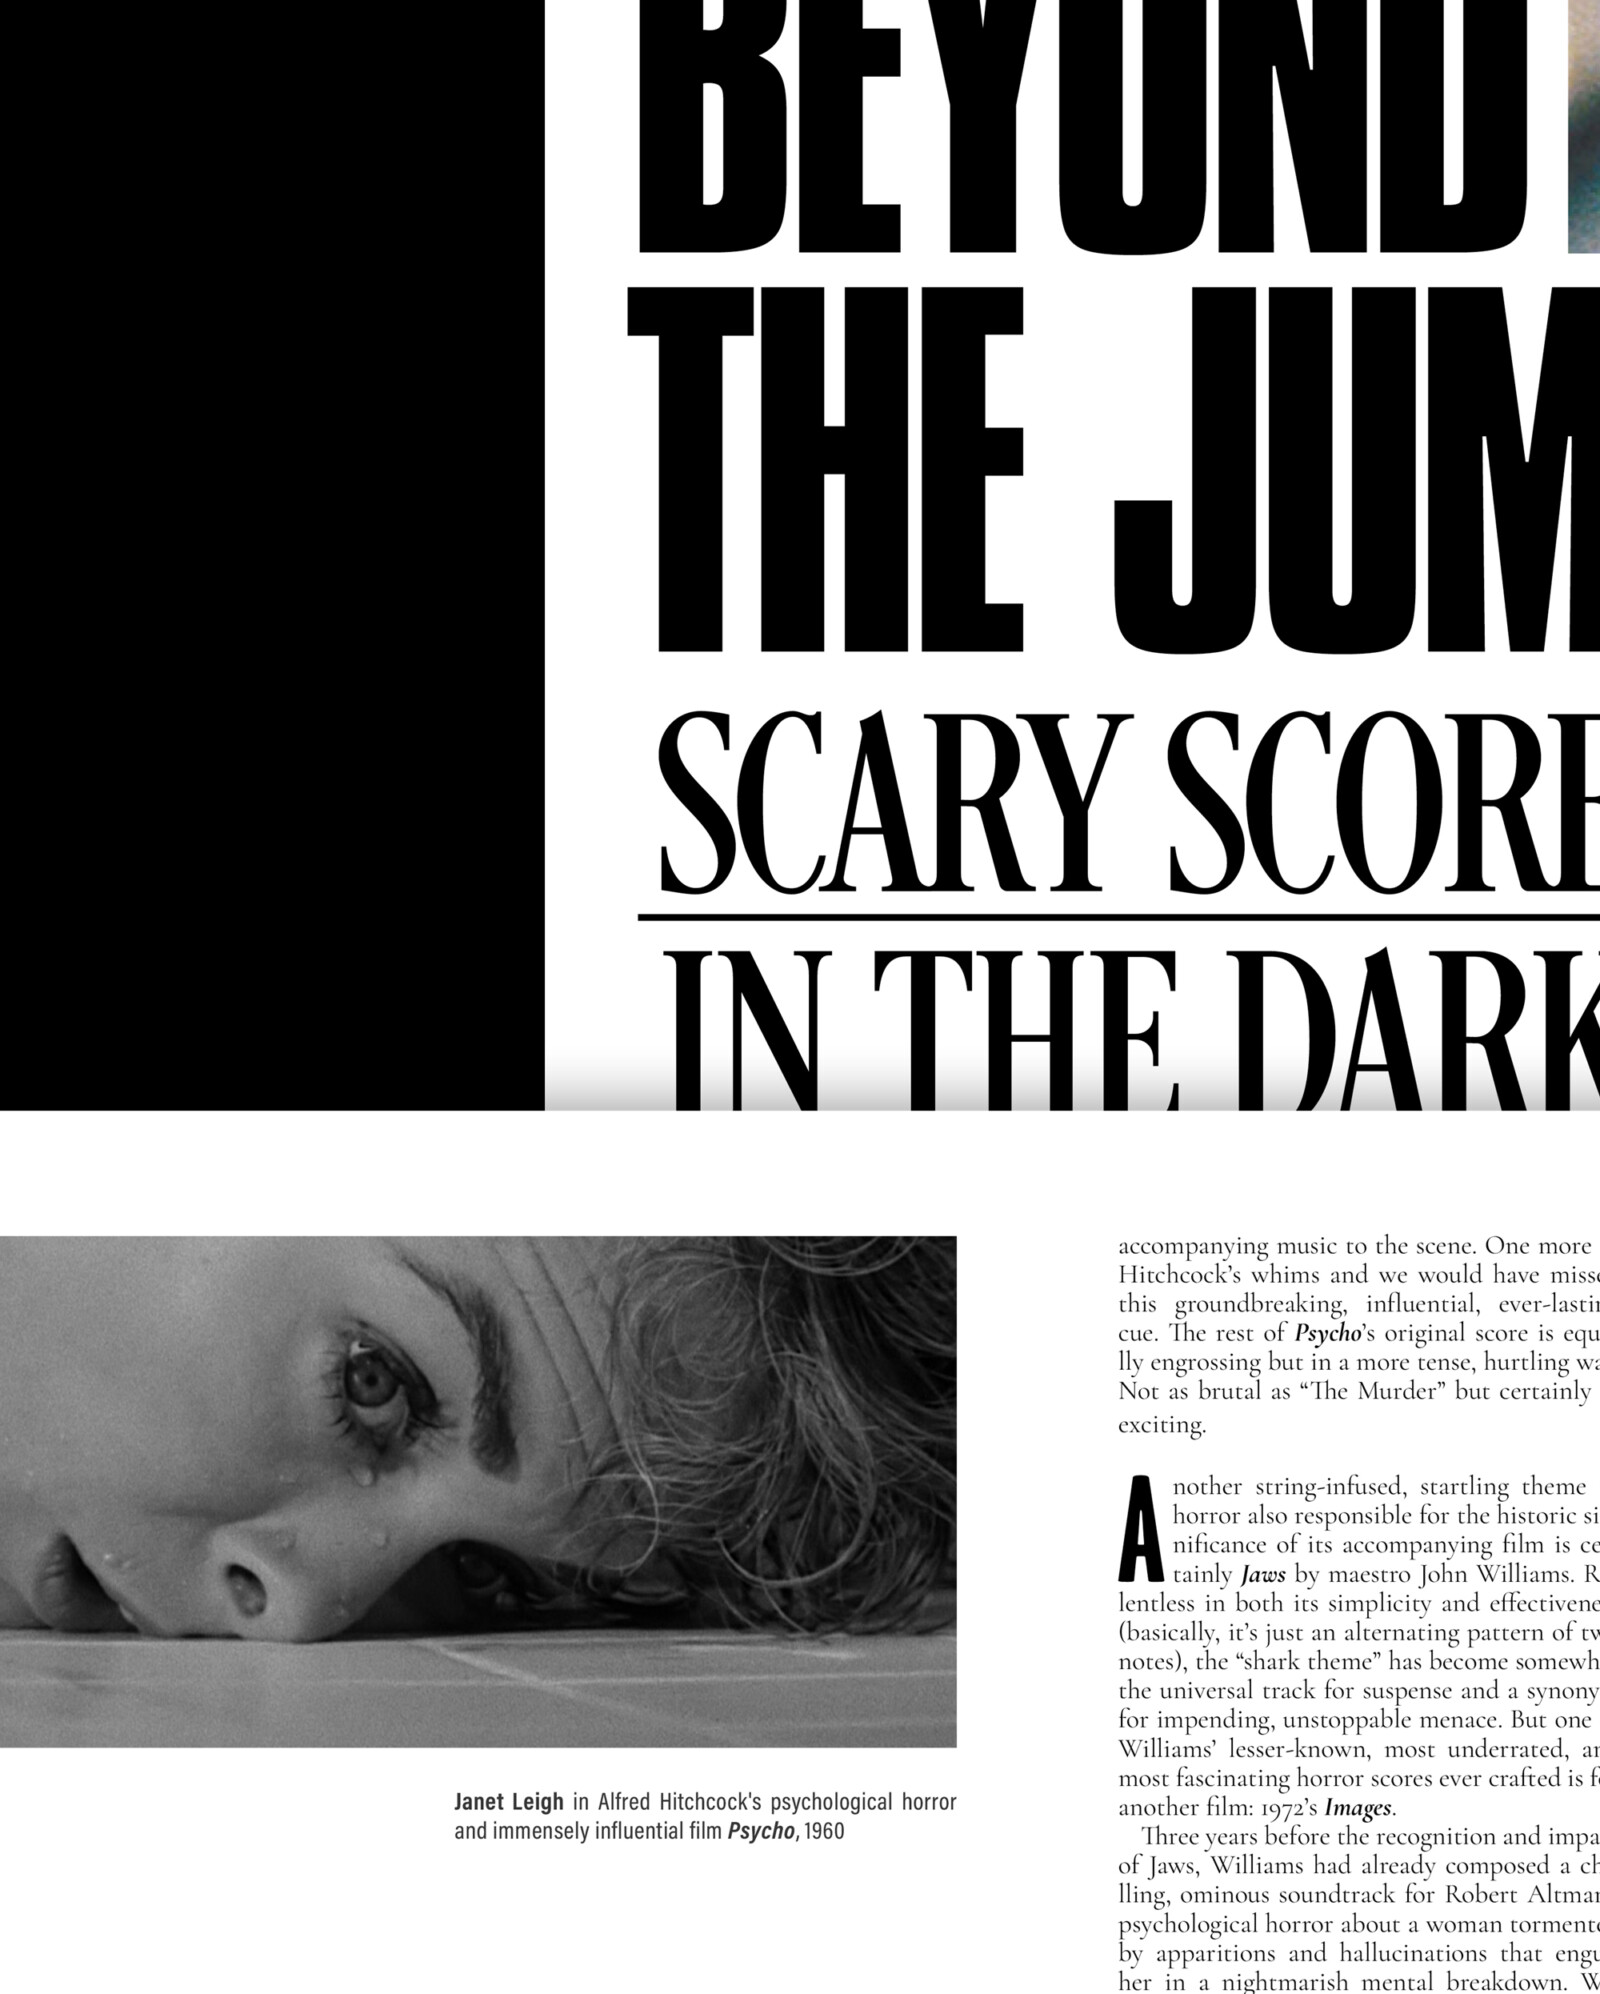 Beyond The Jumpscare | Editorial Project by Aleks Phoenix